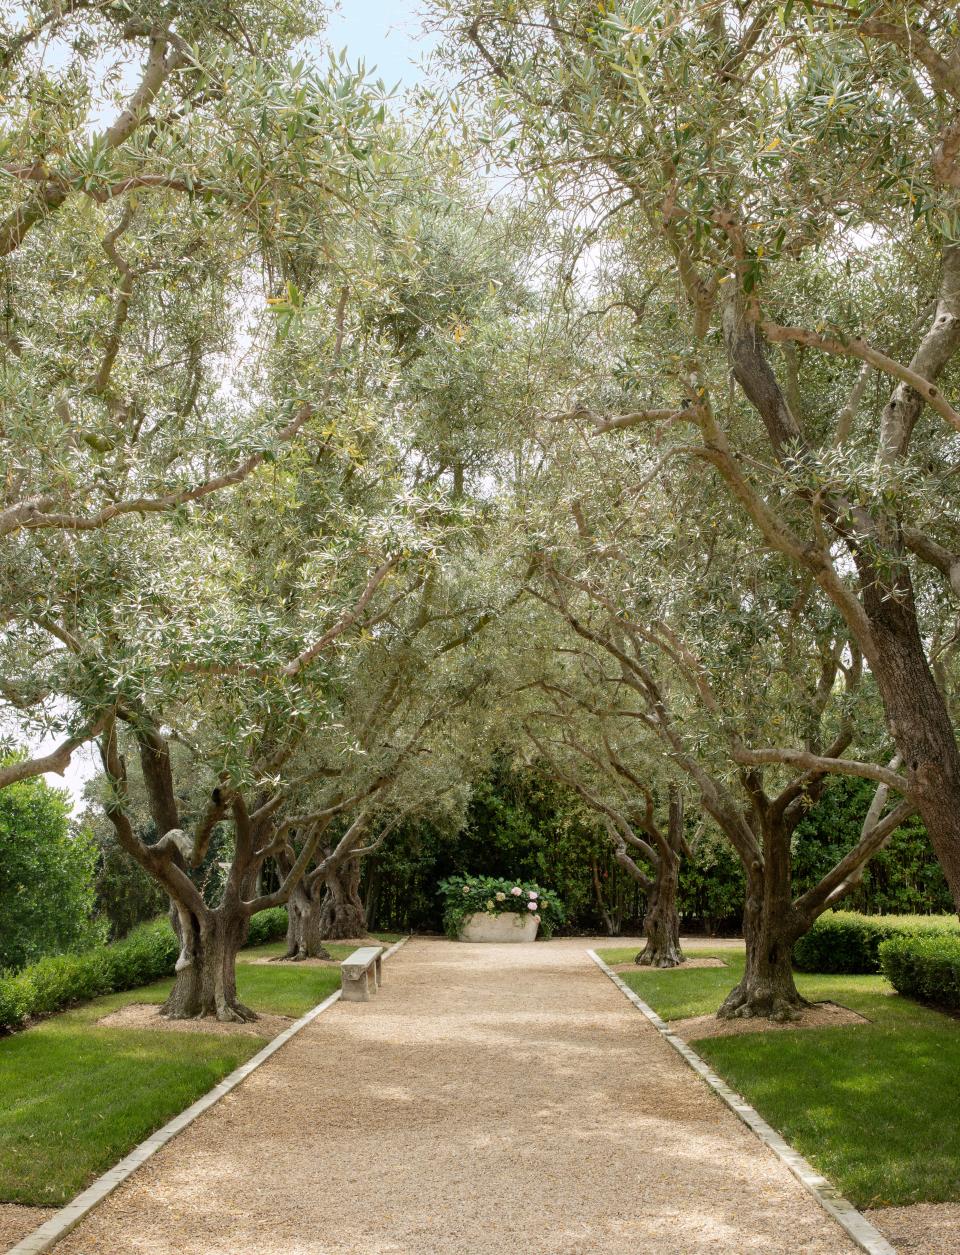 The allée of olive trees terminates in an antique marble trough planted with hydrangea.